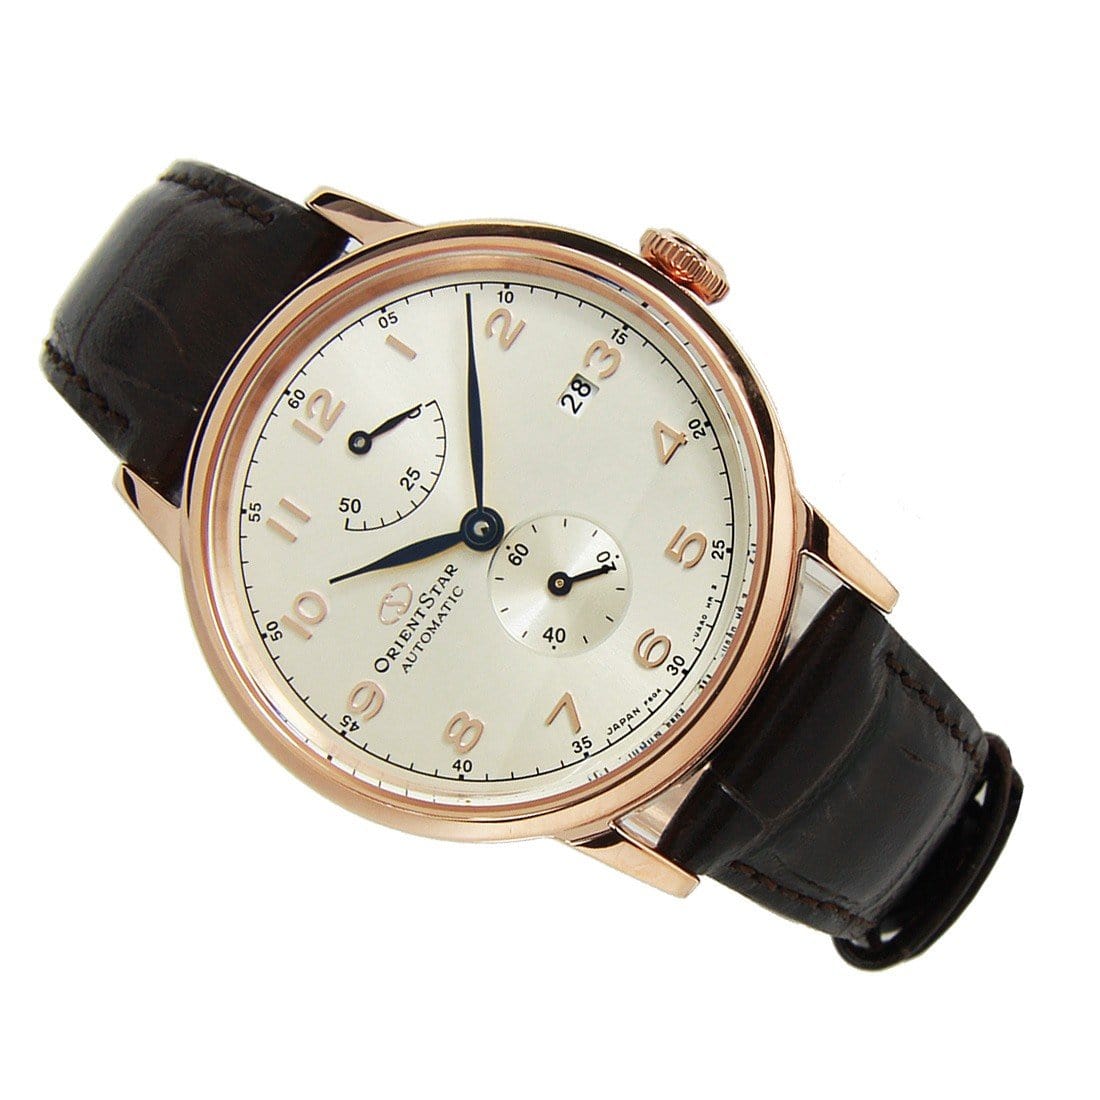 Orient Star Automatic Power Reserve Mens Watch RE-AW0003S00B